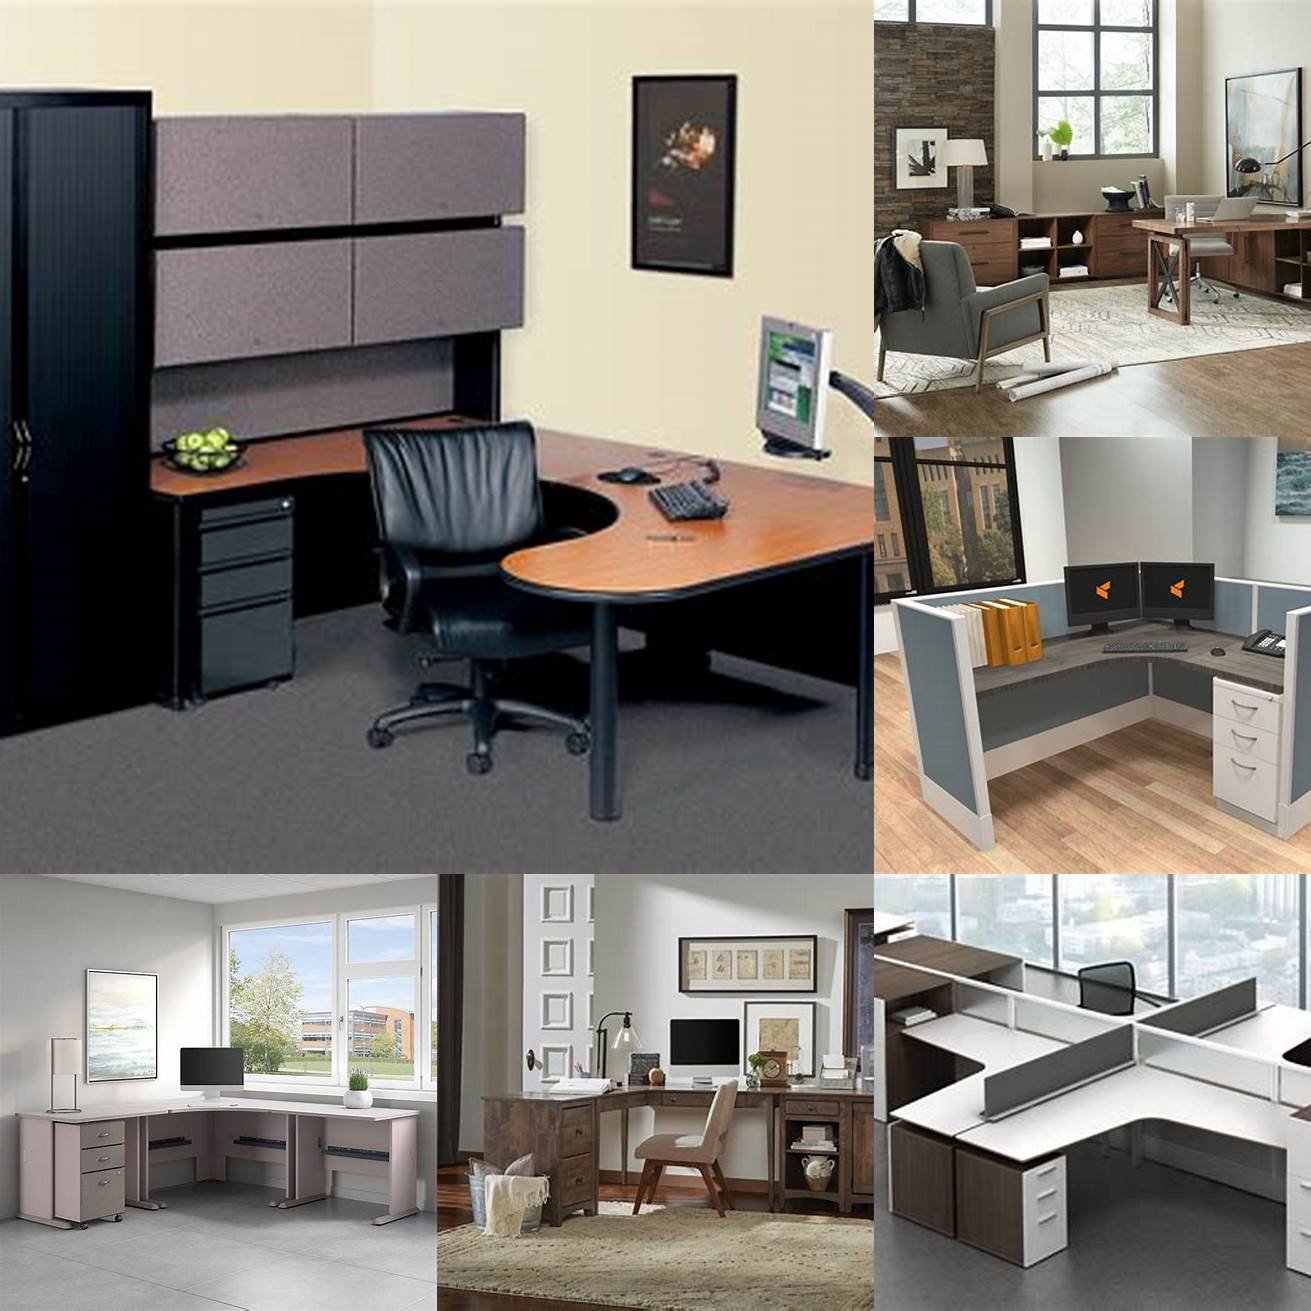 Modular office furniture in different settings